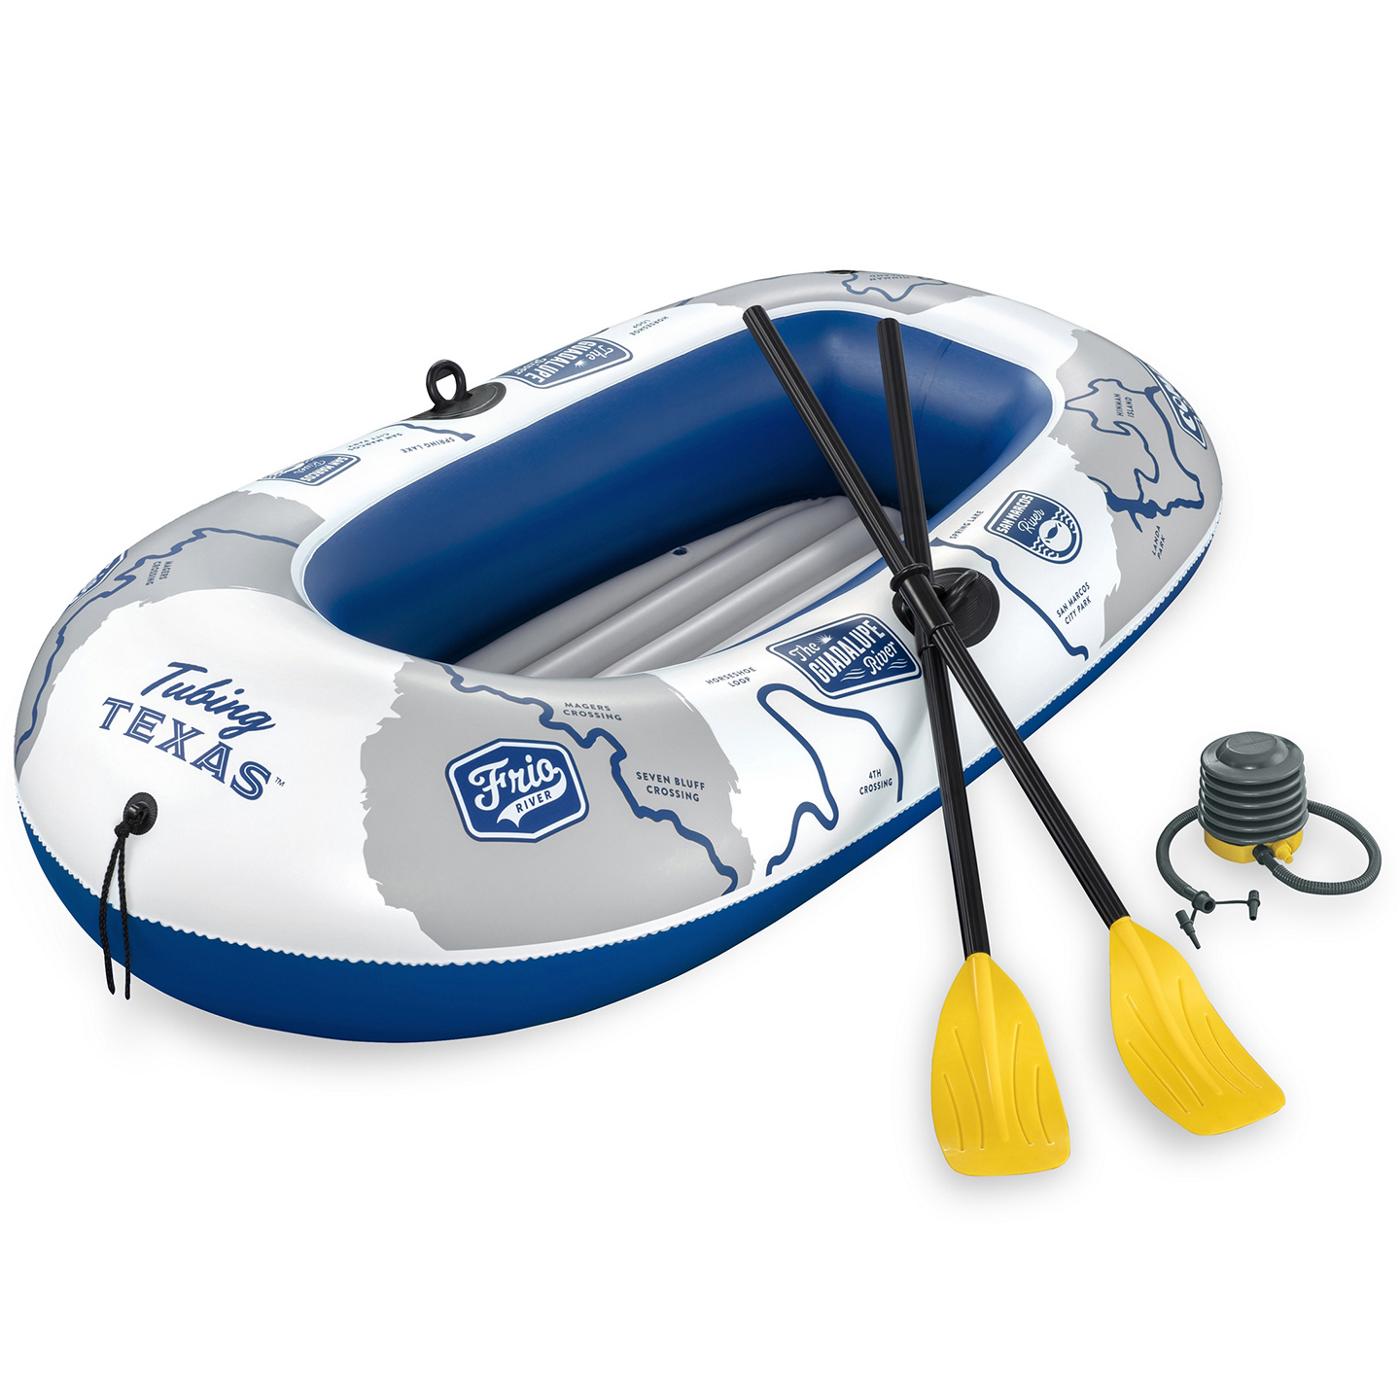 H-E-B Tubing Texas Inflatable Raft with Oars - Shop Floats at H-E-B